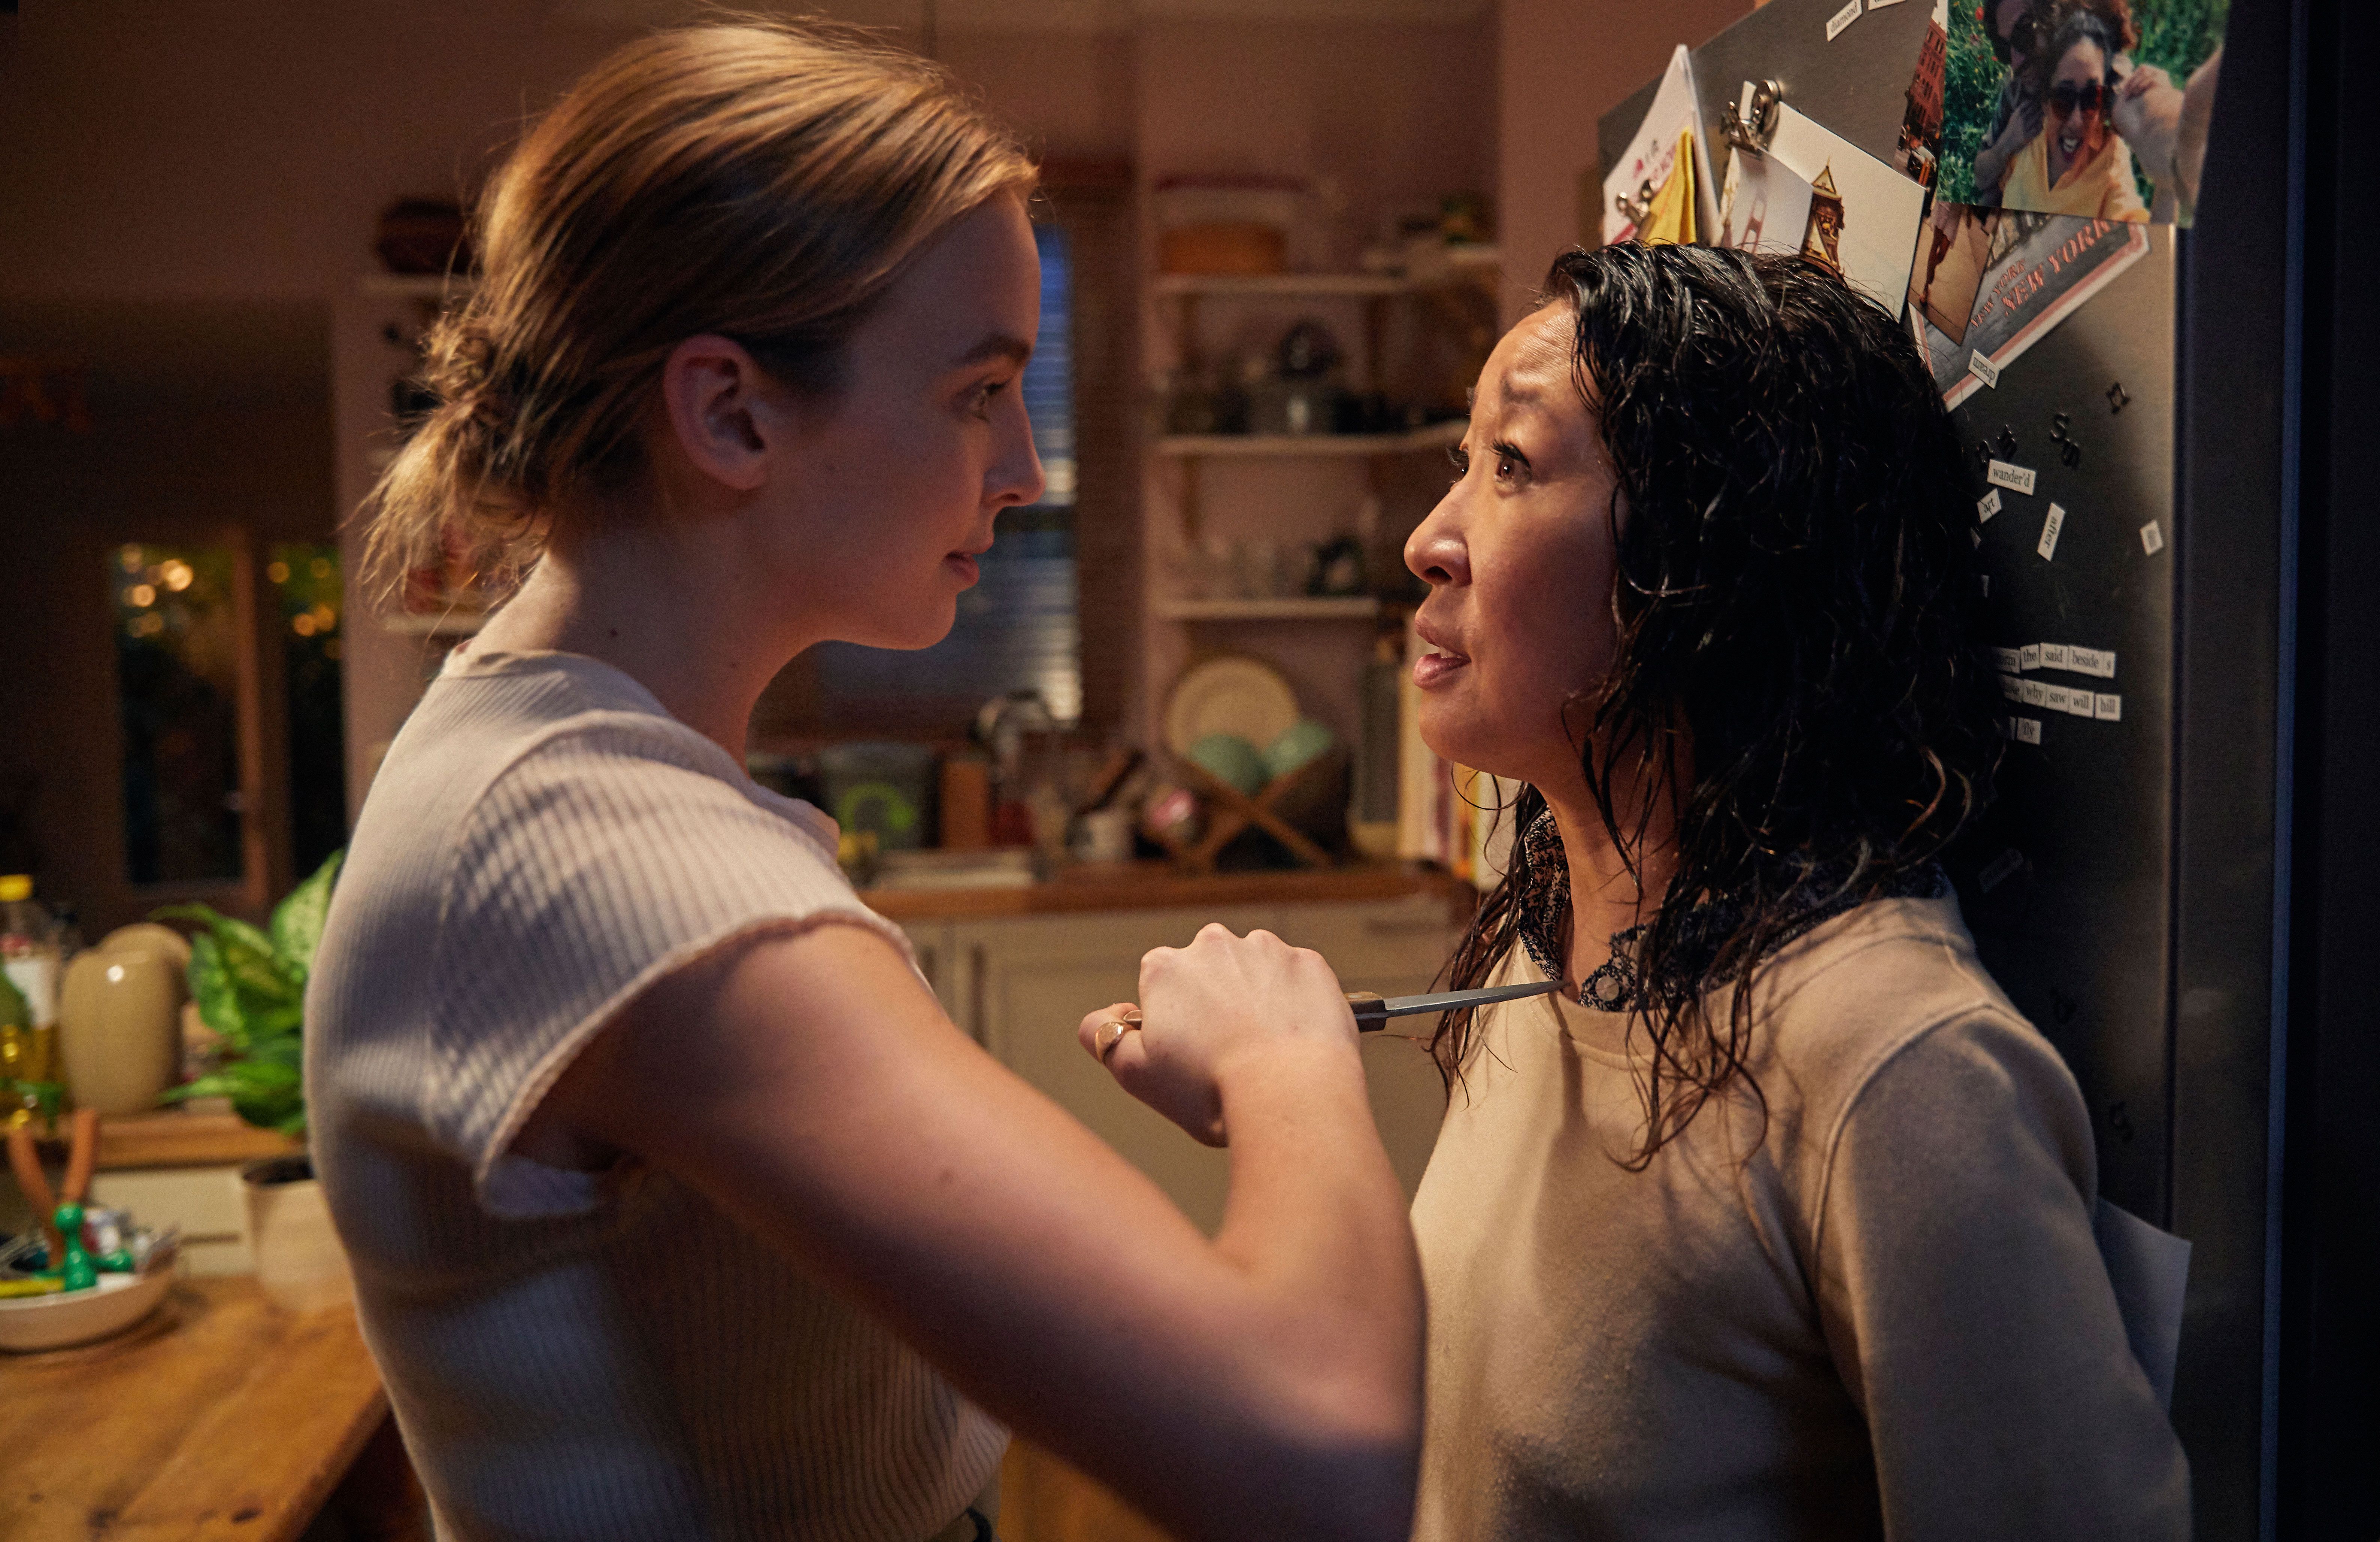 Is Killing Eve's Villanelle an Accurate Female Psychopath?